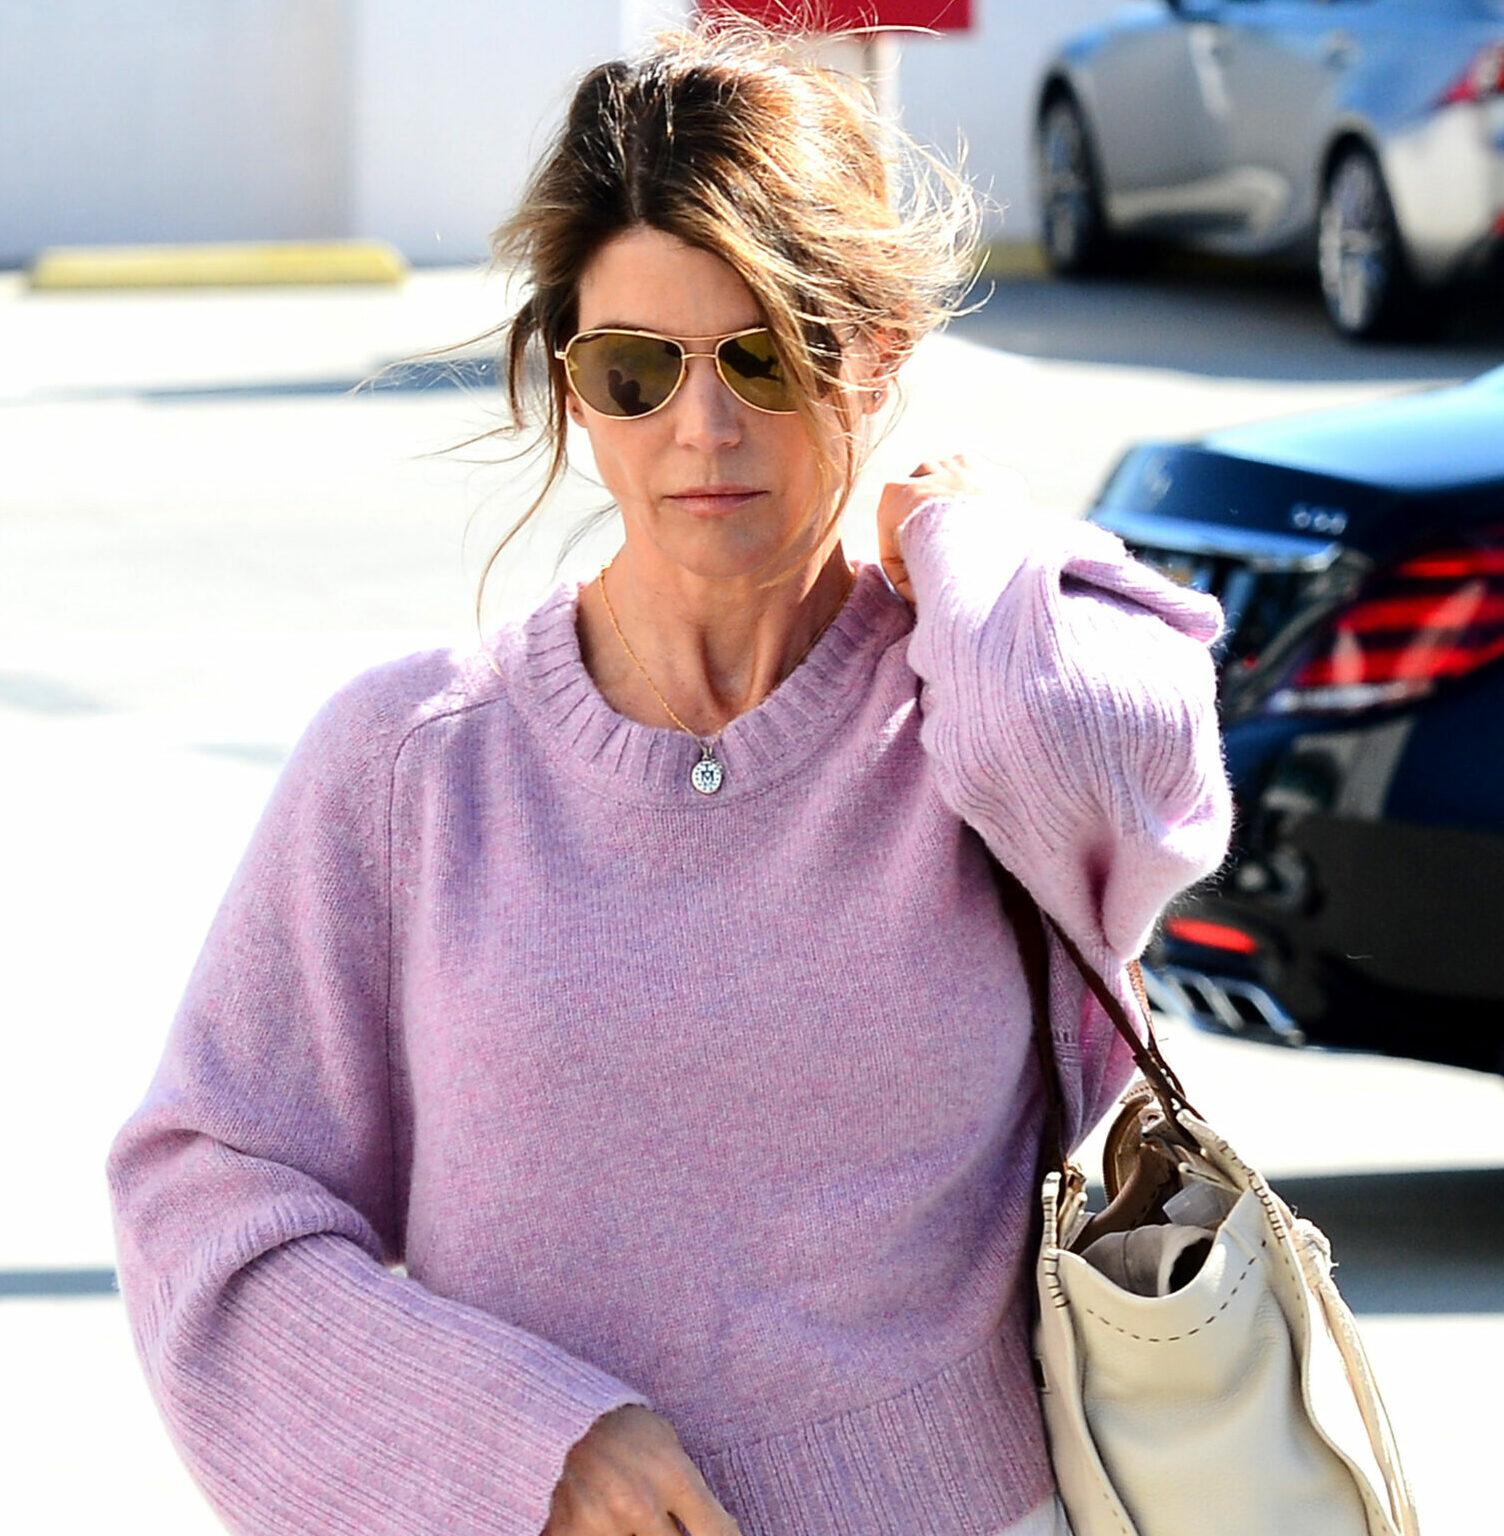 Lori Loughlin Meets Up With a Mystery Man at an Orthopedic Clinic